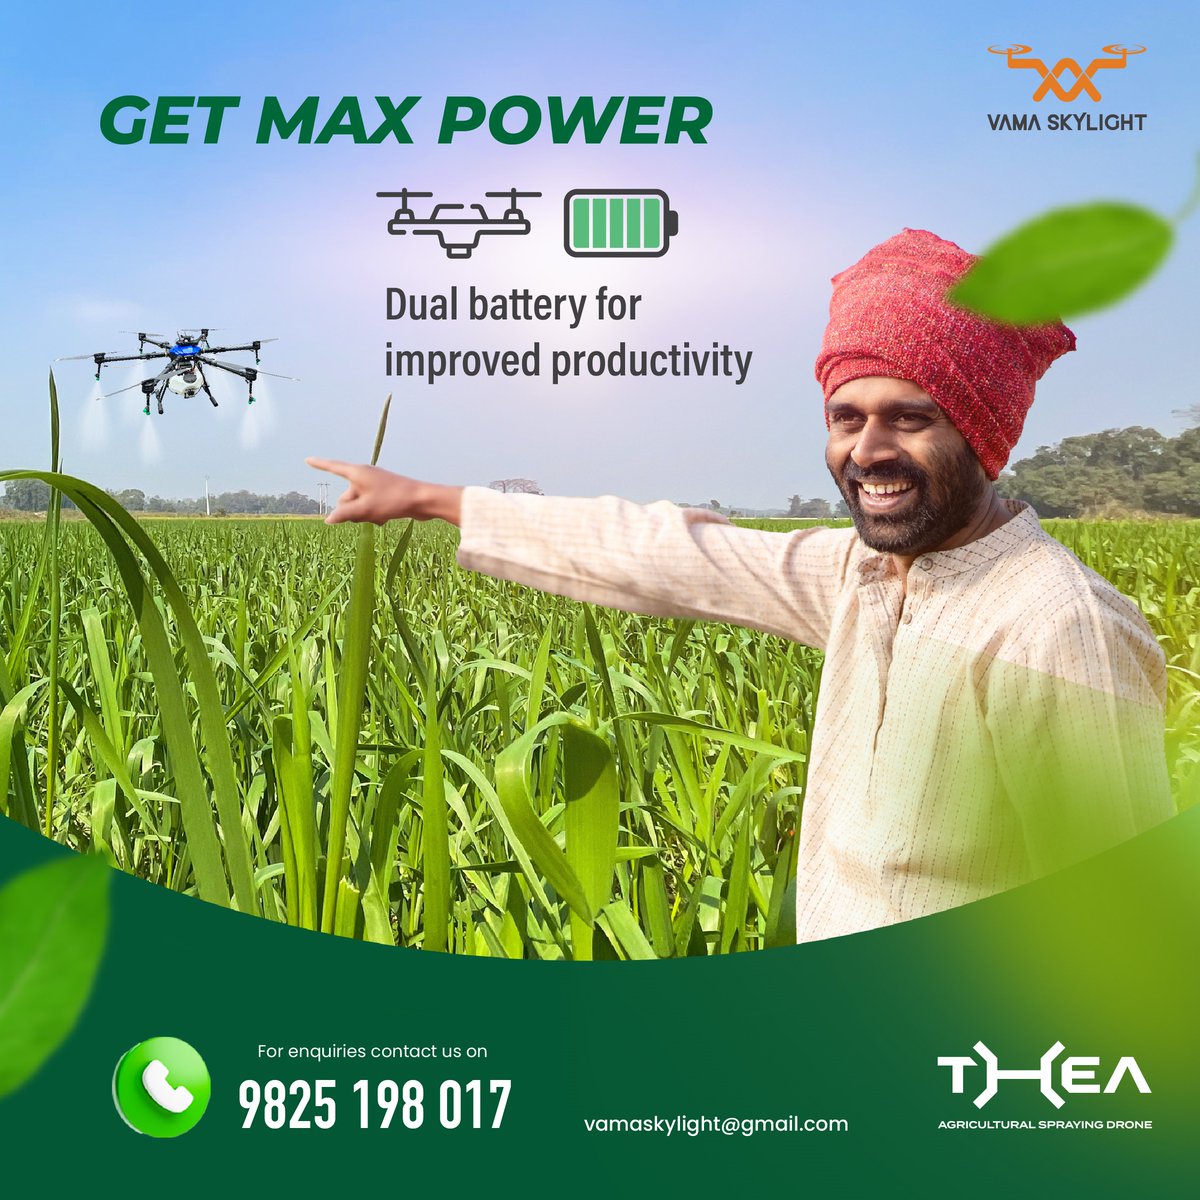 THEA drones are powered by two lithium-polymer batteries with a capacity of 22,000 mAh. Enjoy MAX power, productivity and value for money with THEA drones. #drones #dronetraining #droneservices  #dronestartup #dronetech #indianstartups #agriculturedrone #farmers #dronetechnology